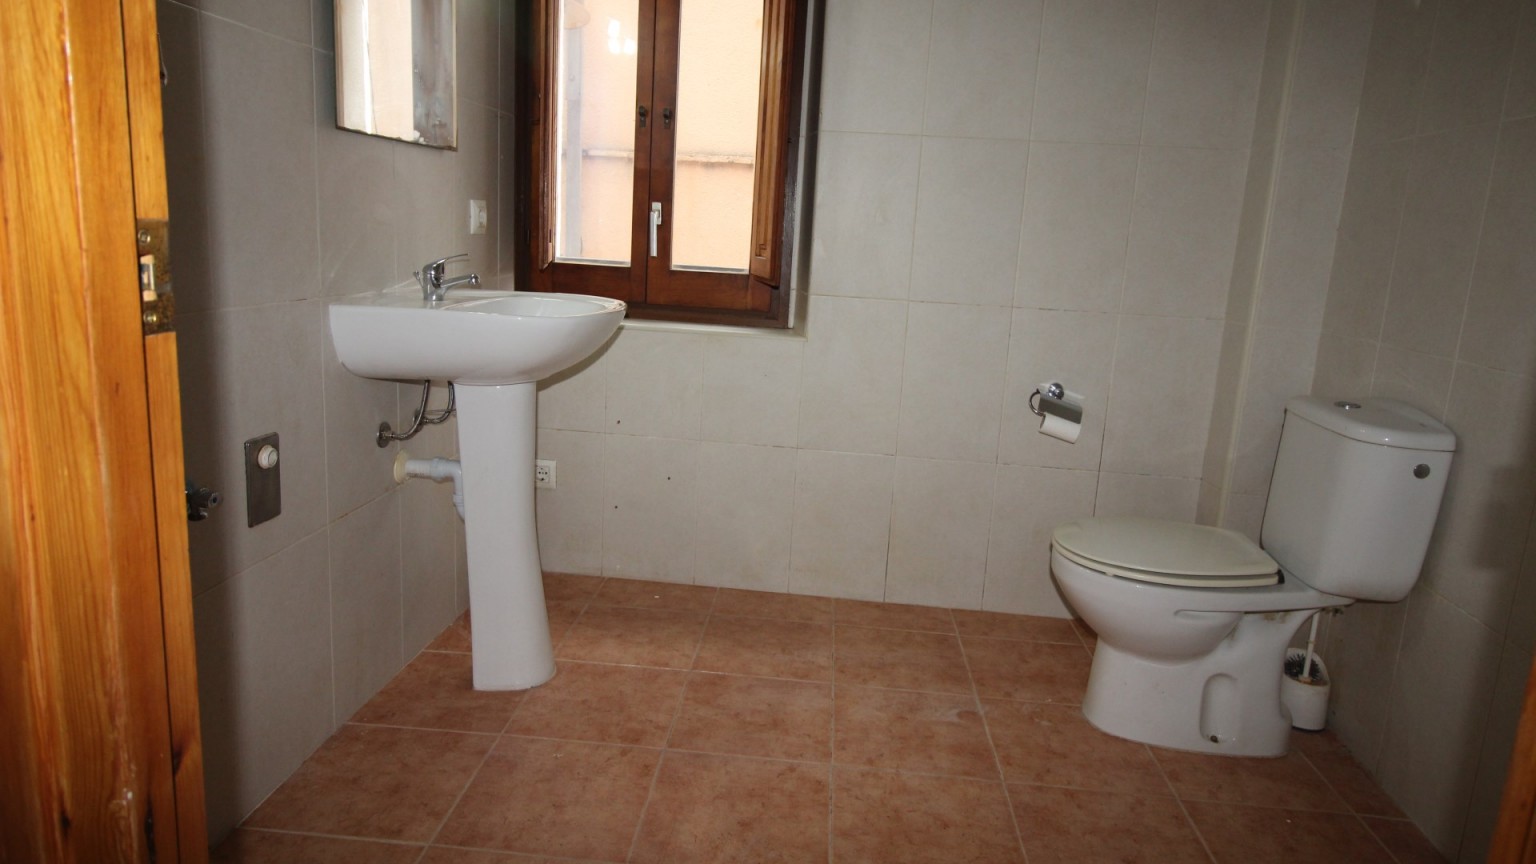 Apartment for sale with 2 bedrooms, in the municipality of Lladó.